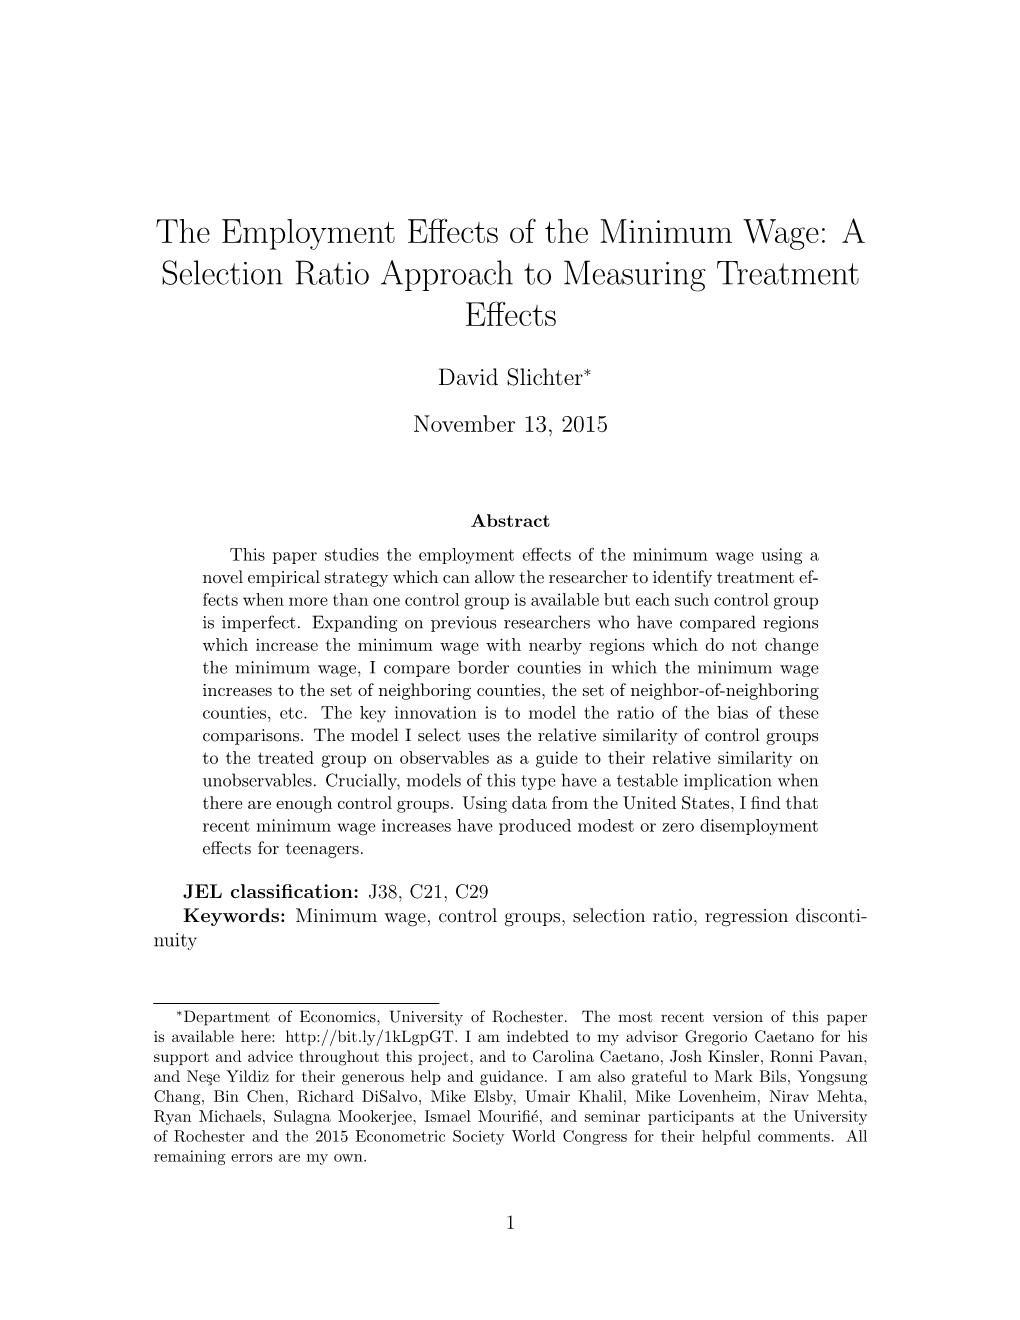 The Employment Effects of the Minimum Wage: a Selection Ratio